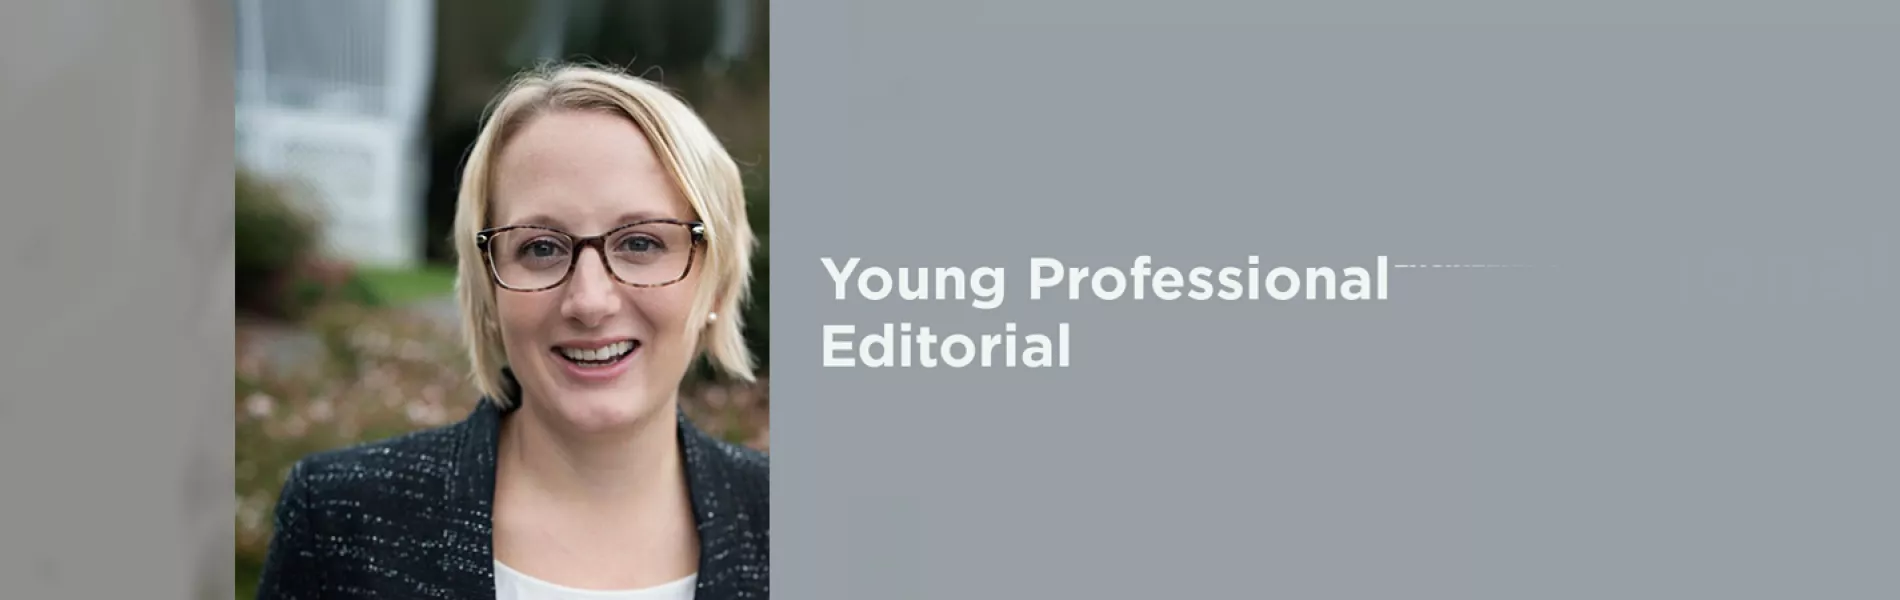 Young Professional Editorial: Career Development - Goes On